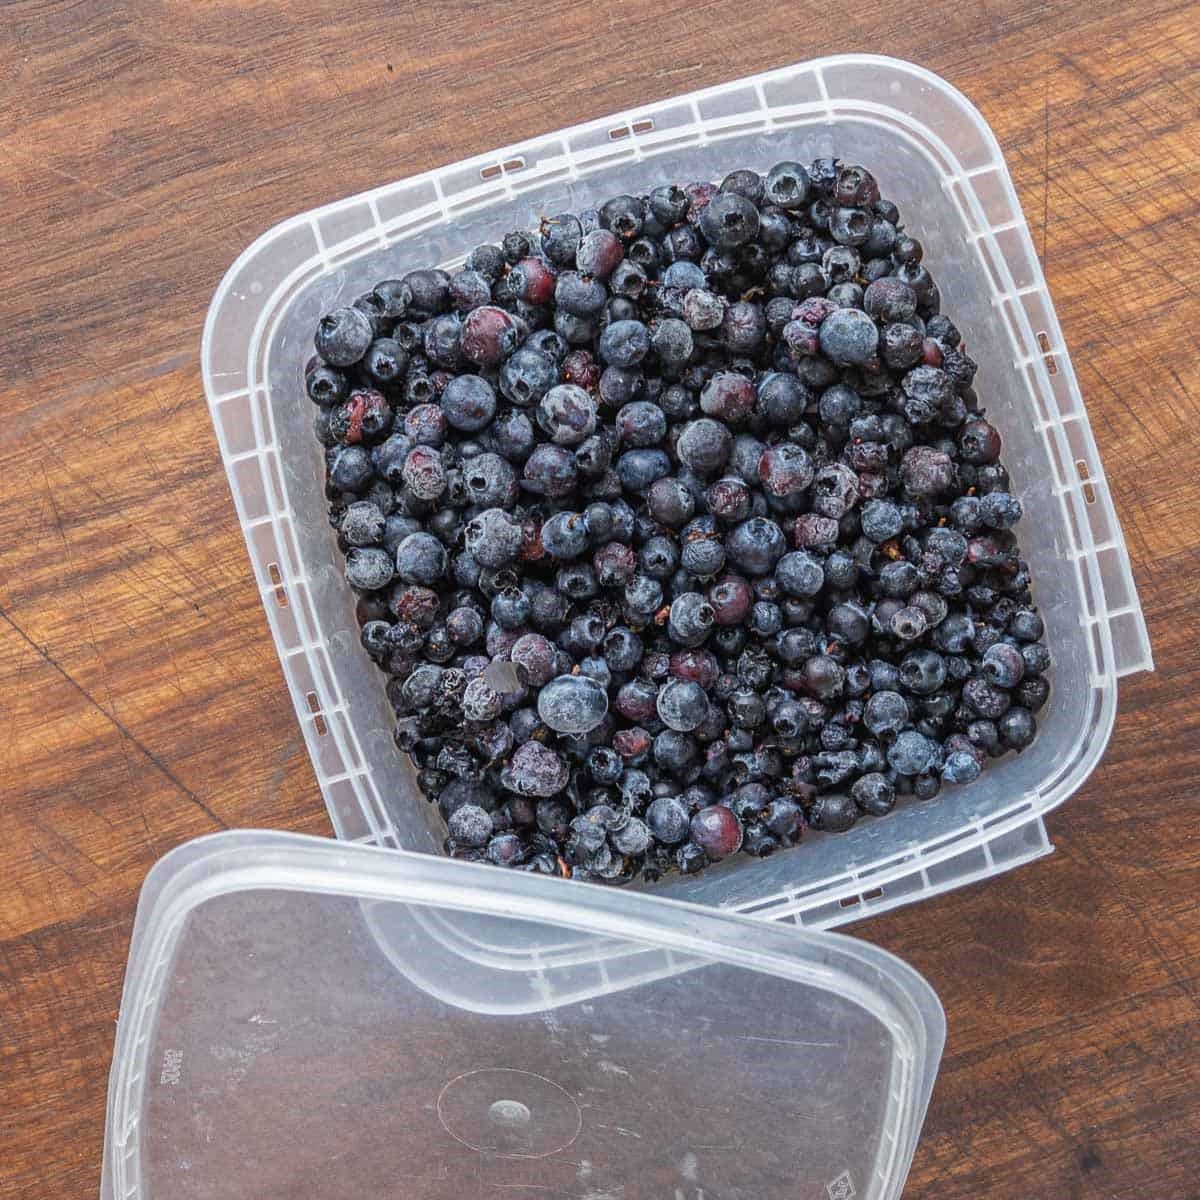 How To Store Blueberries In Tupperware